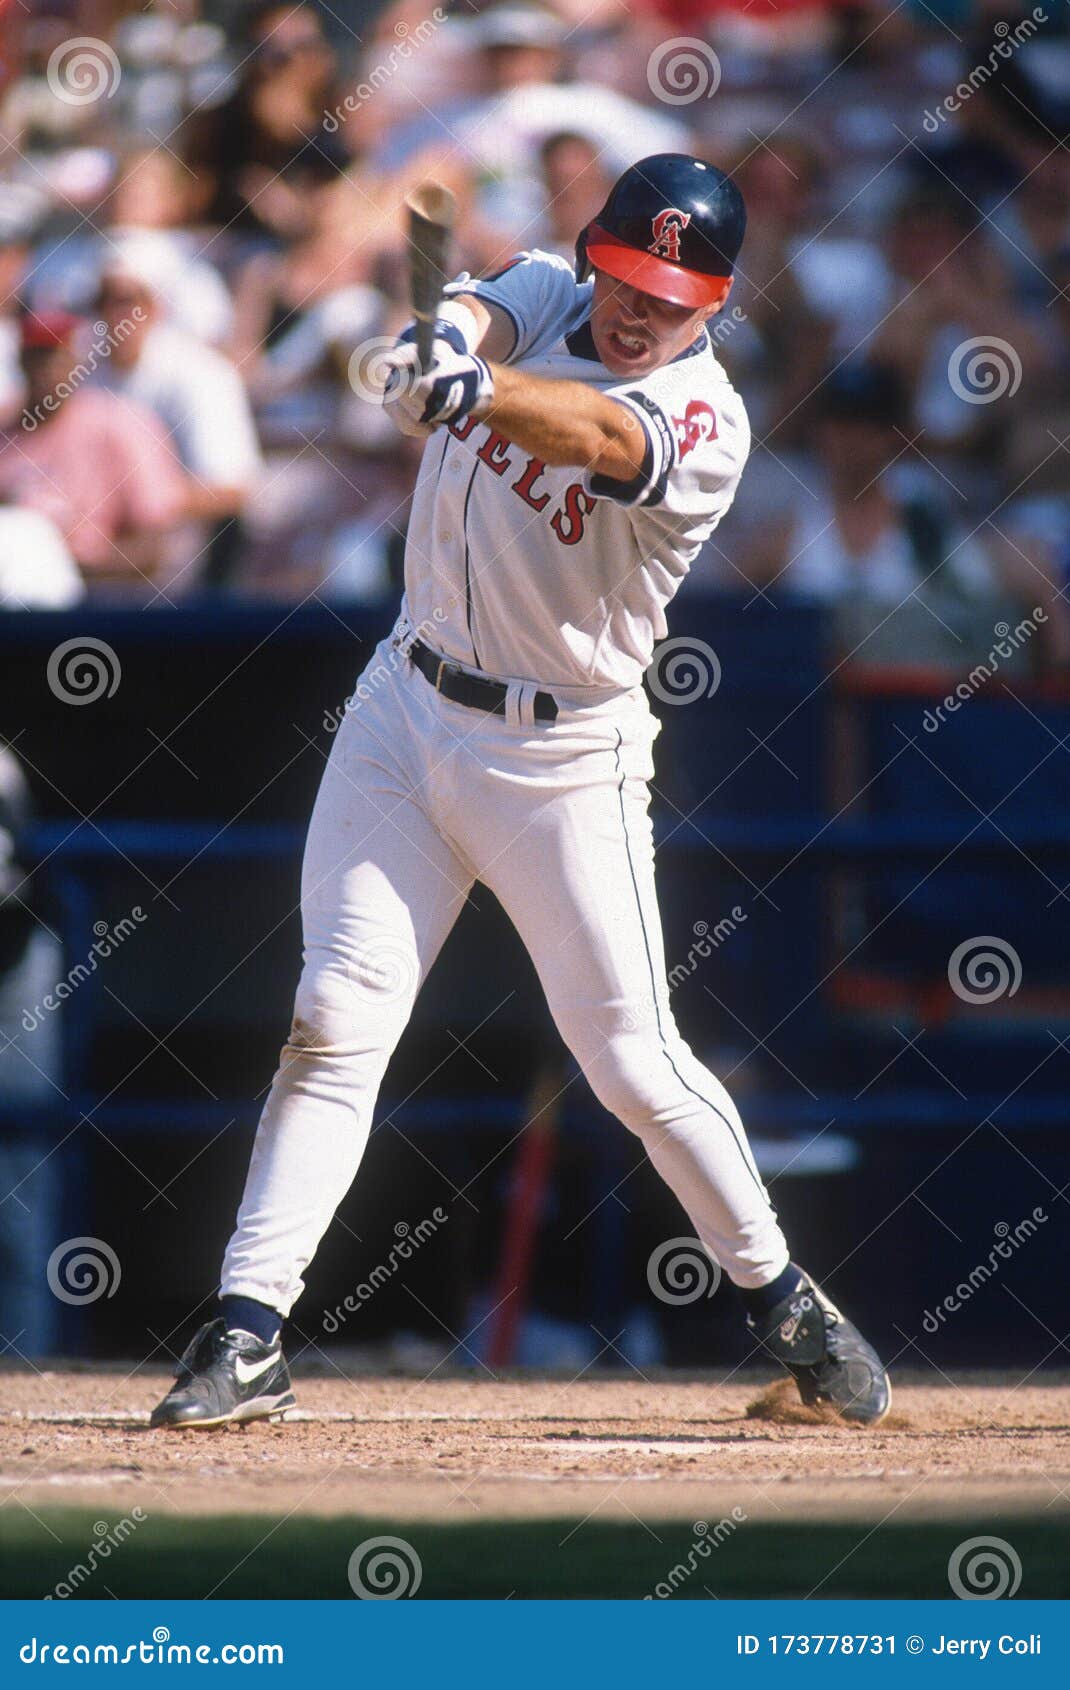 Jim Edmonds of of the Anaheim Angels Editorial Photo - Image of